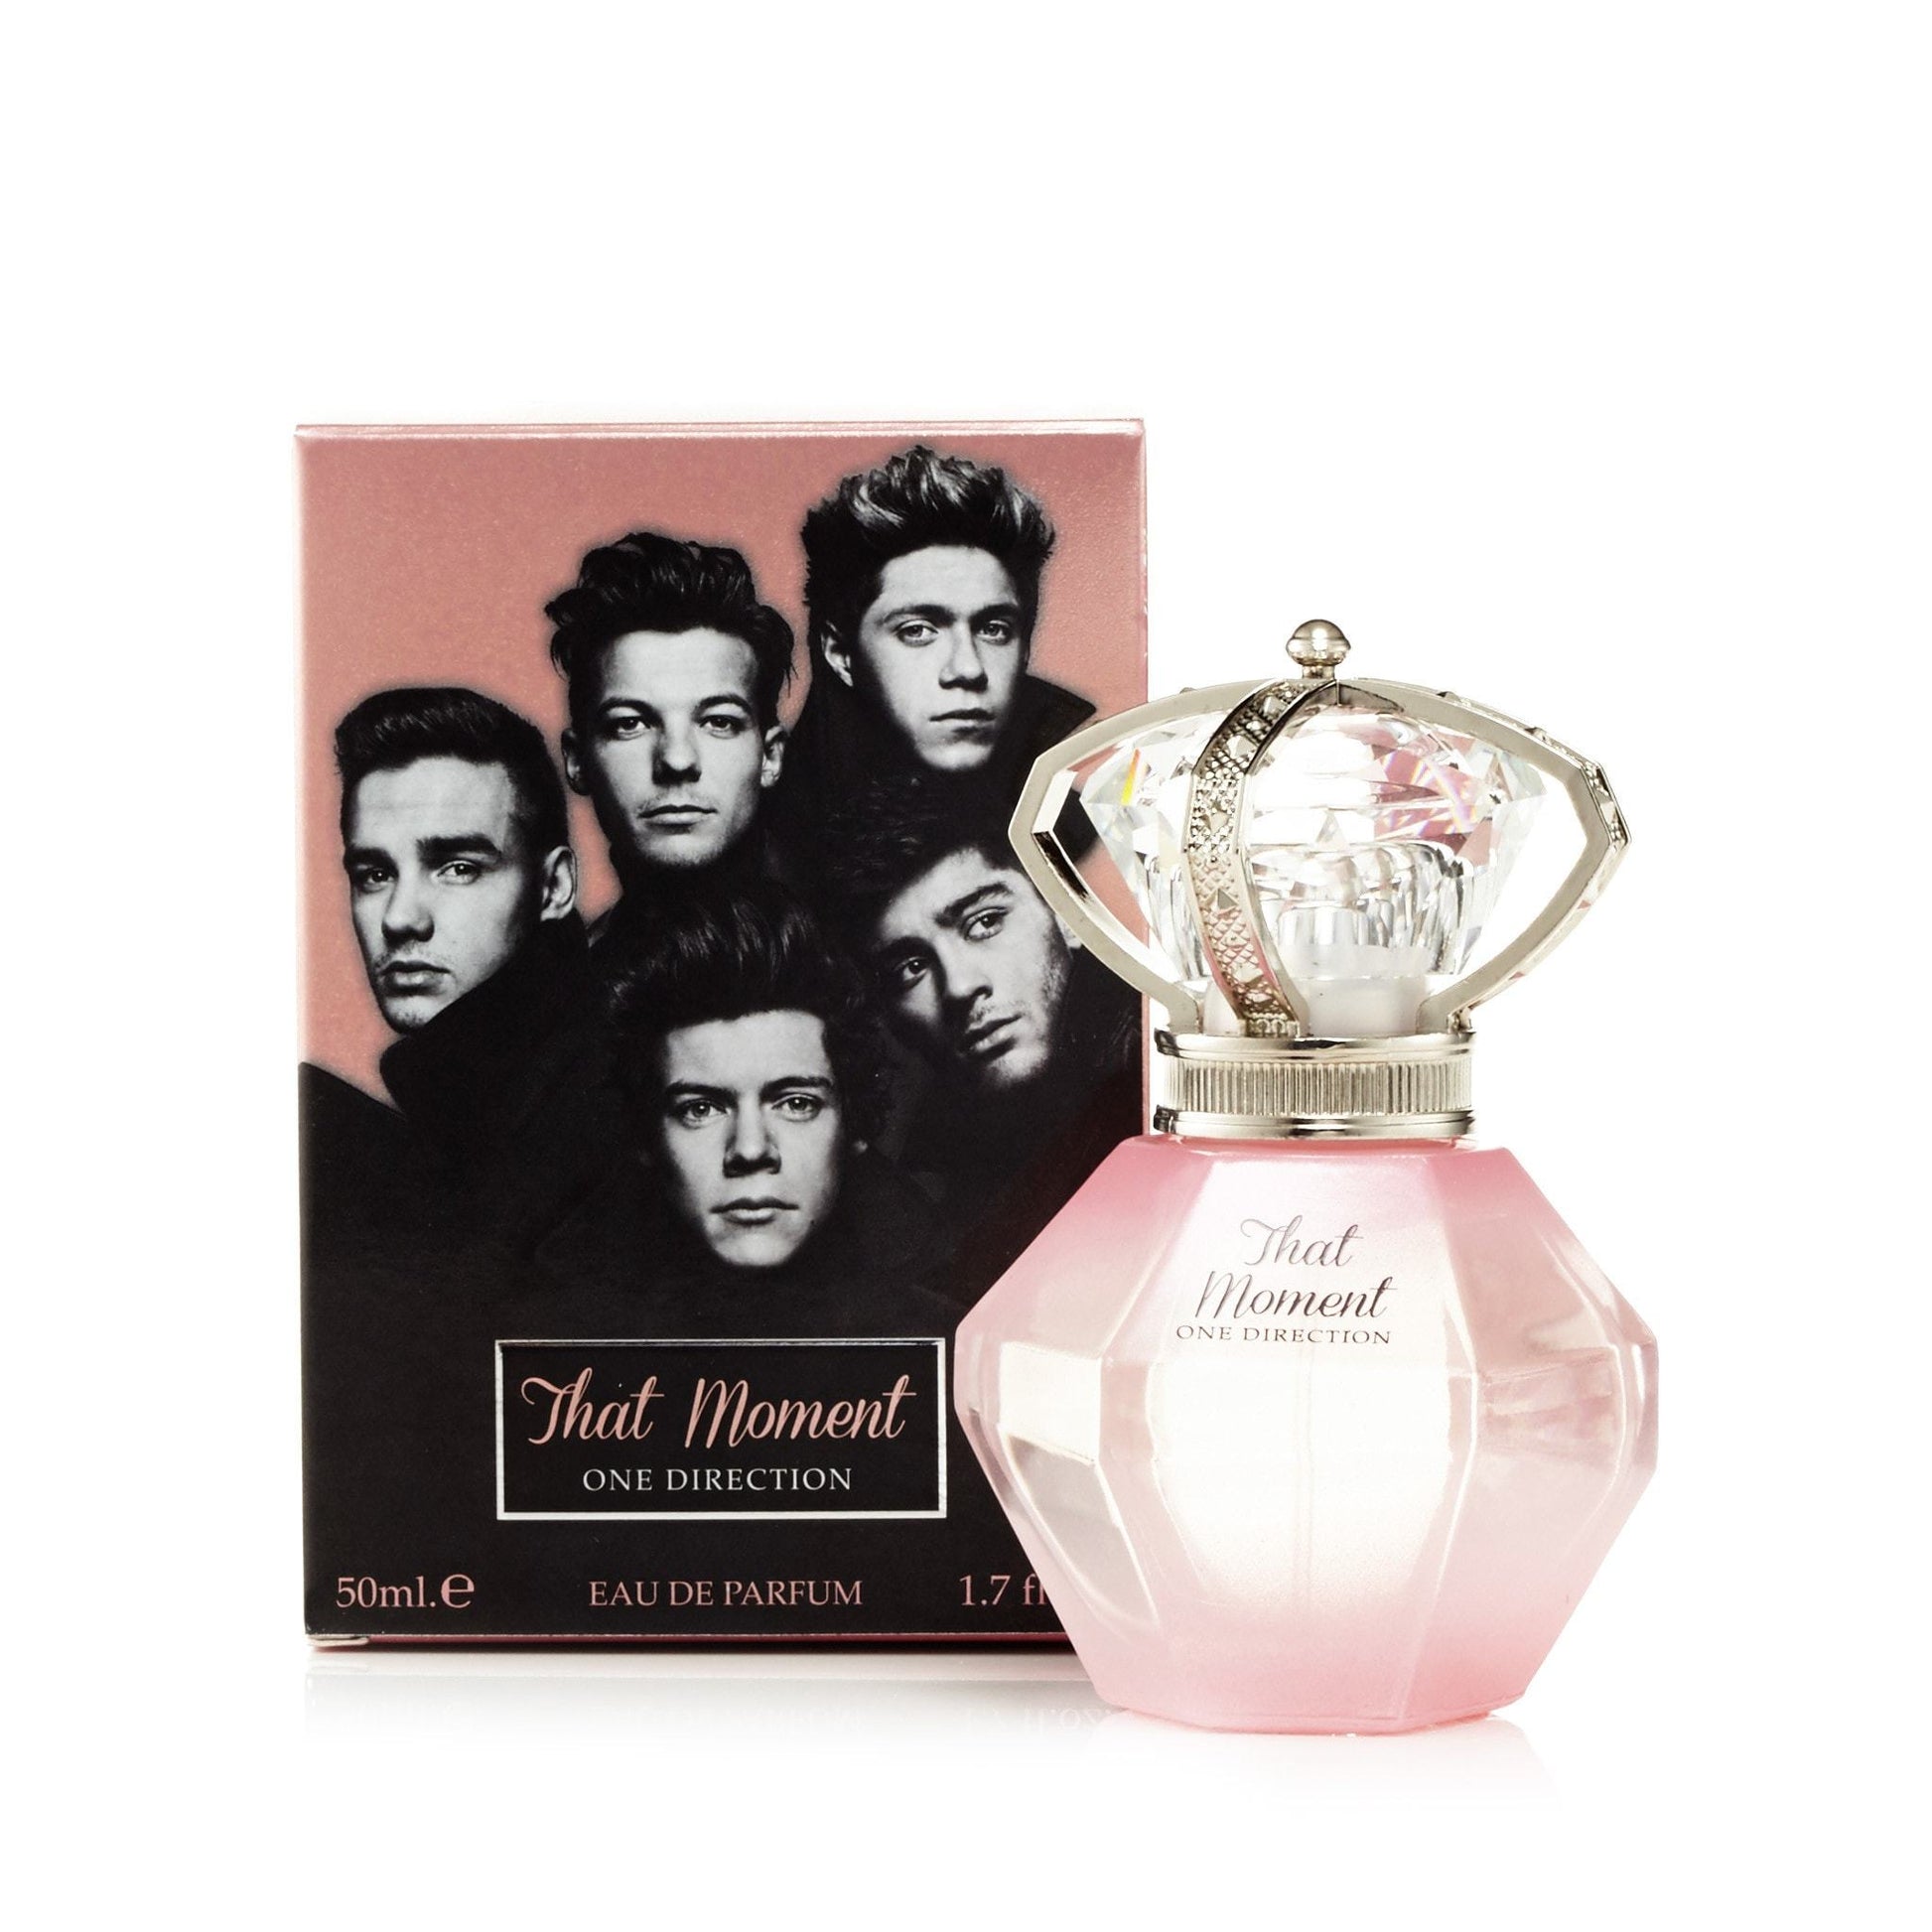 That Moment Eau de Parfum Spray for Women by One Direction, Product image 3